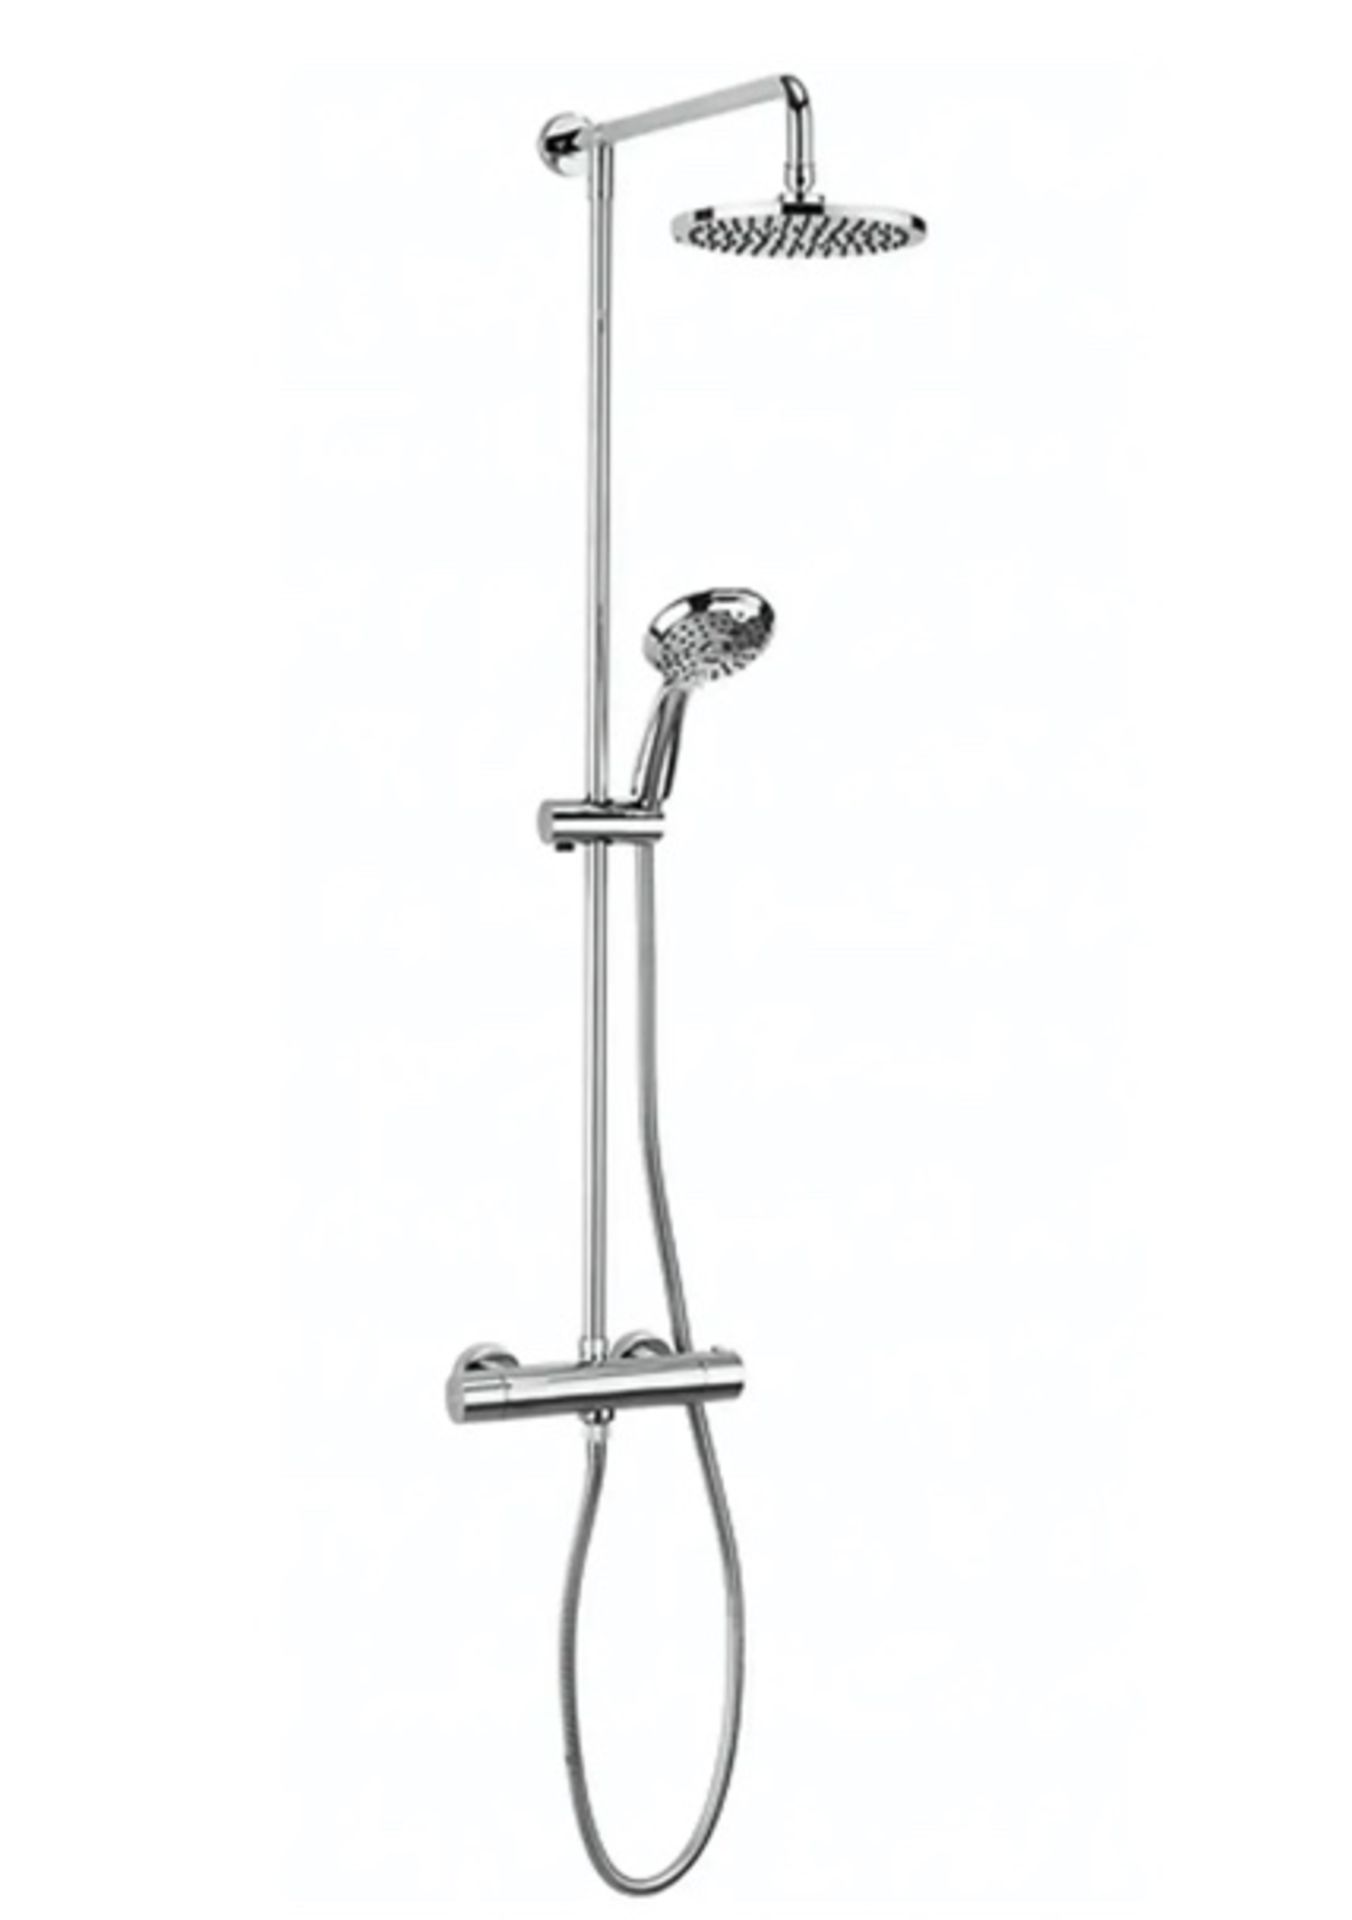 Brand New Boxed Metro Mixer Shower System Thermostatic - Chrome RRP £152 **NO VAT**